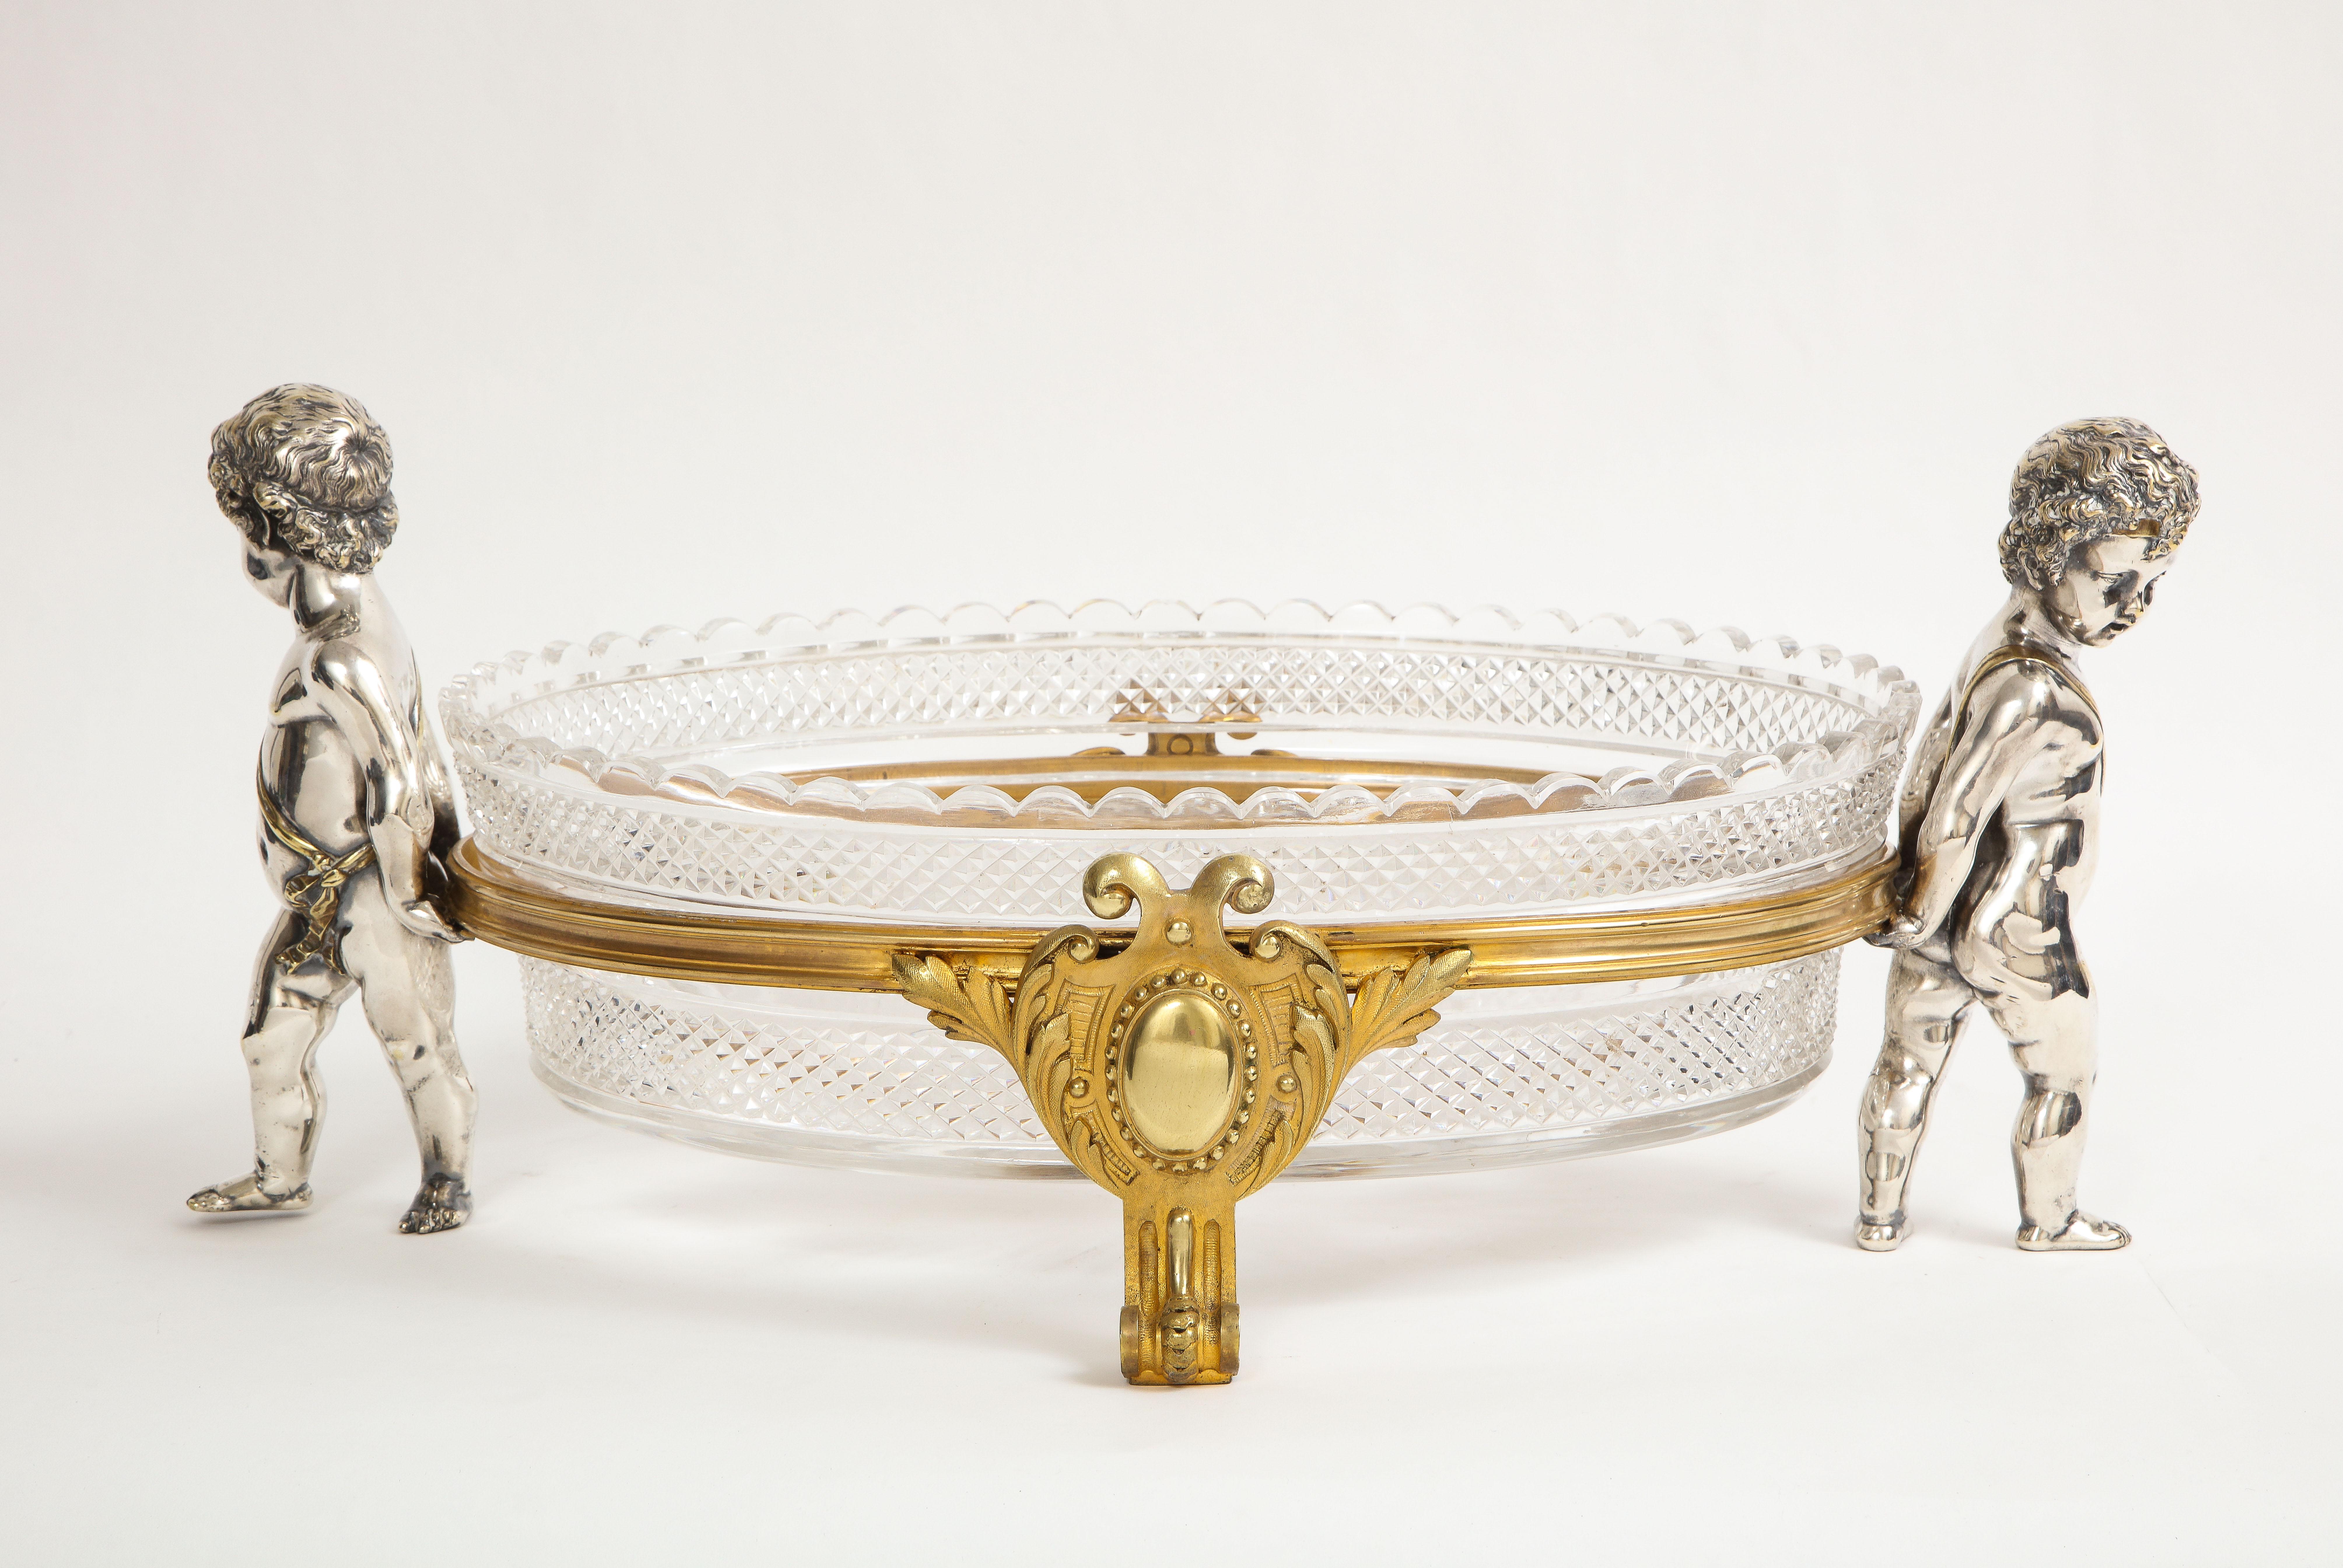 French Silvered & Gilt Bronze Putti Mounted Crystal Centerpiece Baccarat, 1800s For Sale 6